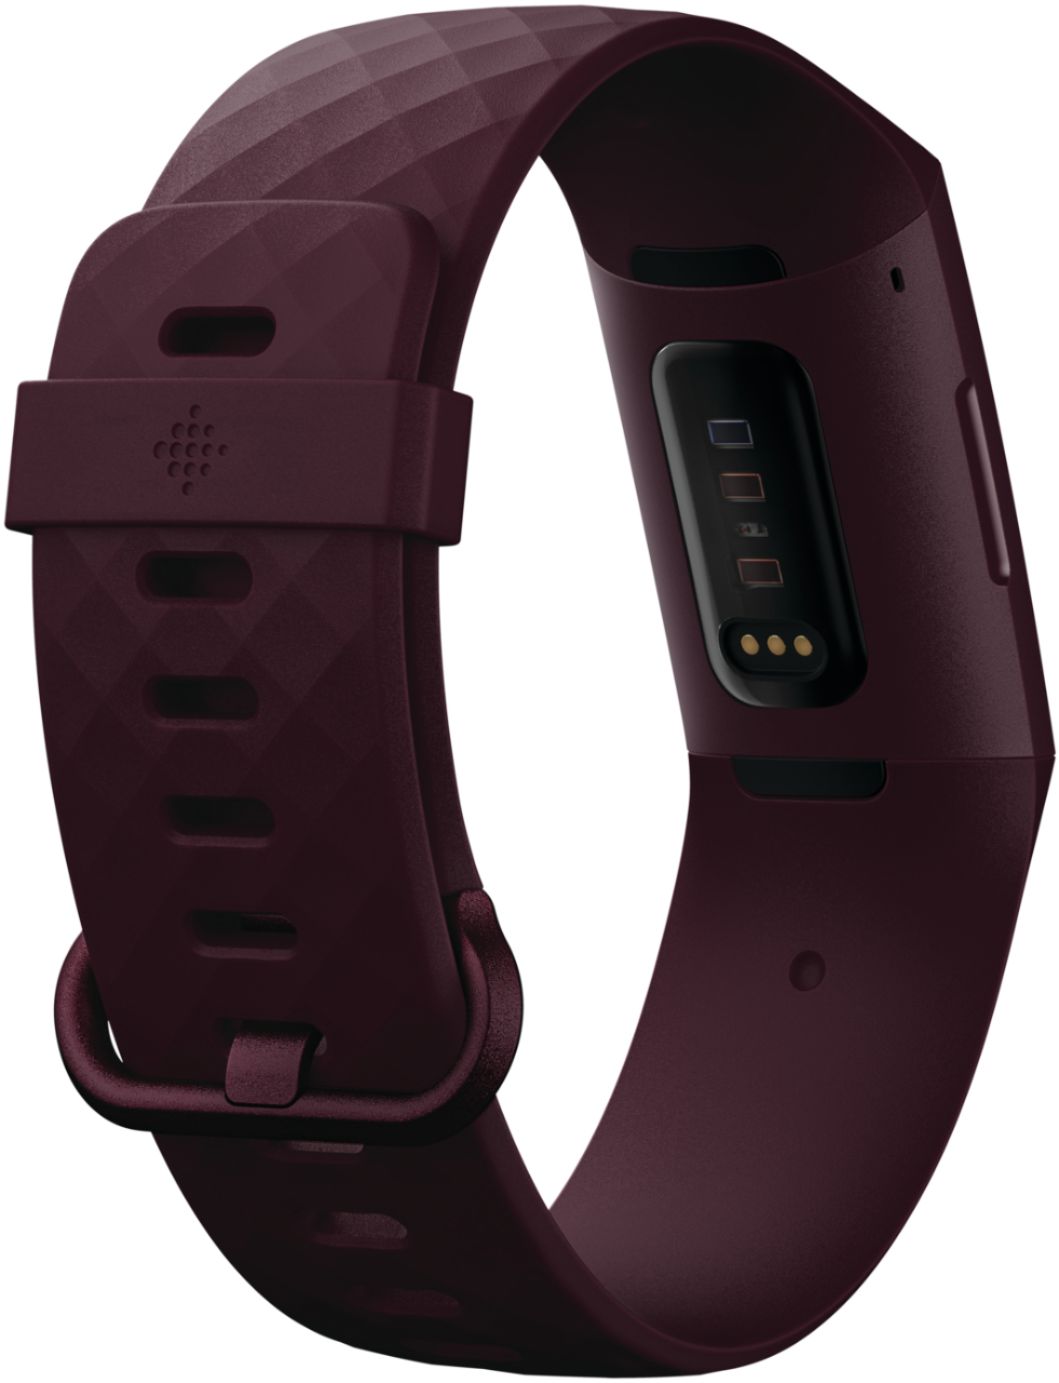 charge 4 fitbit best buy